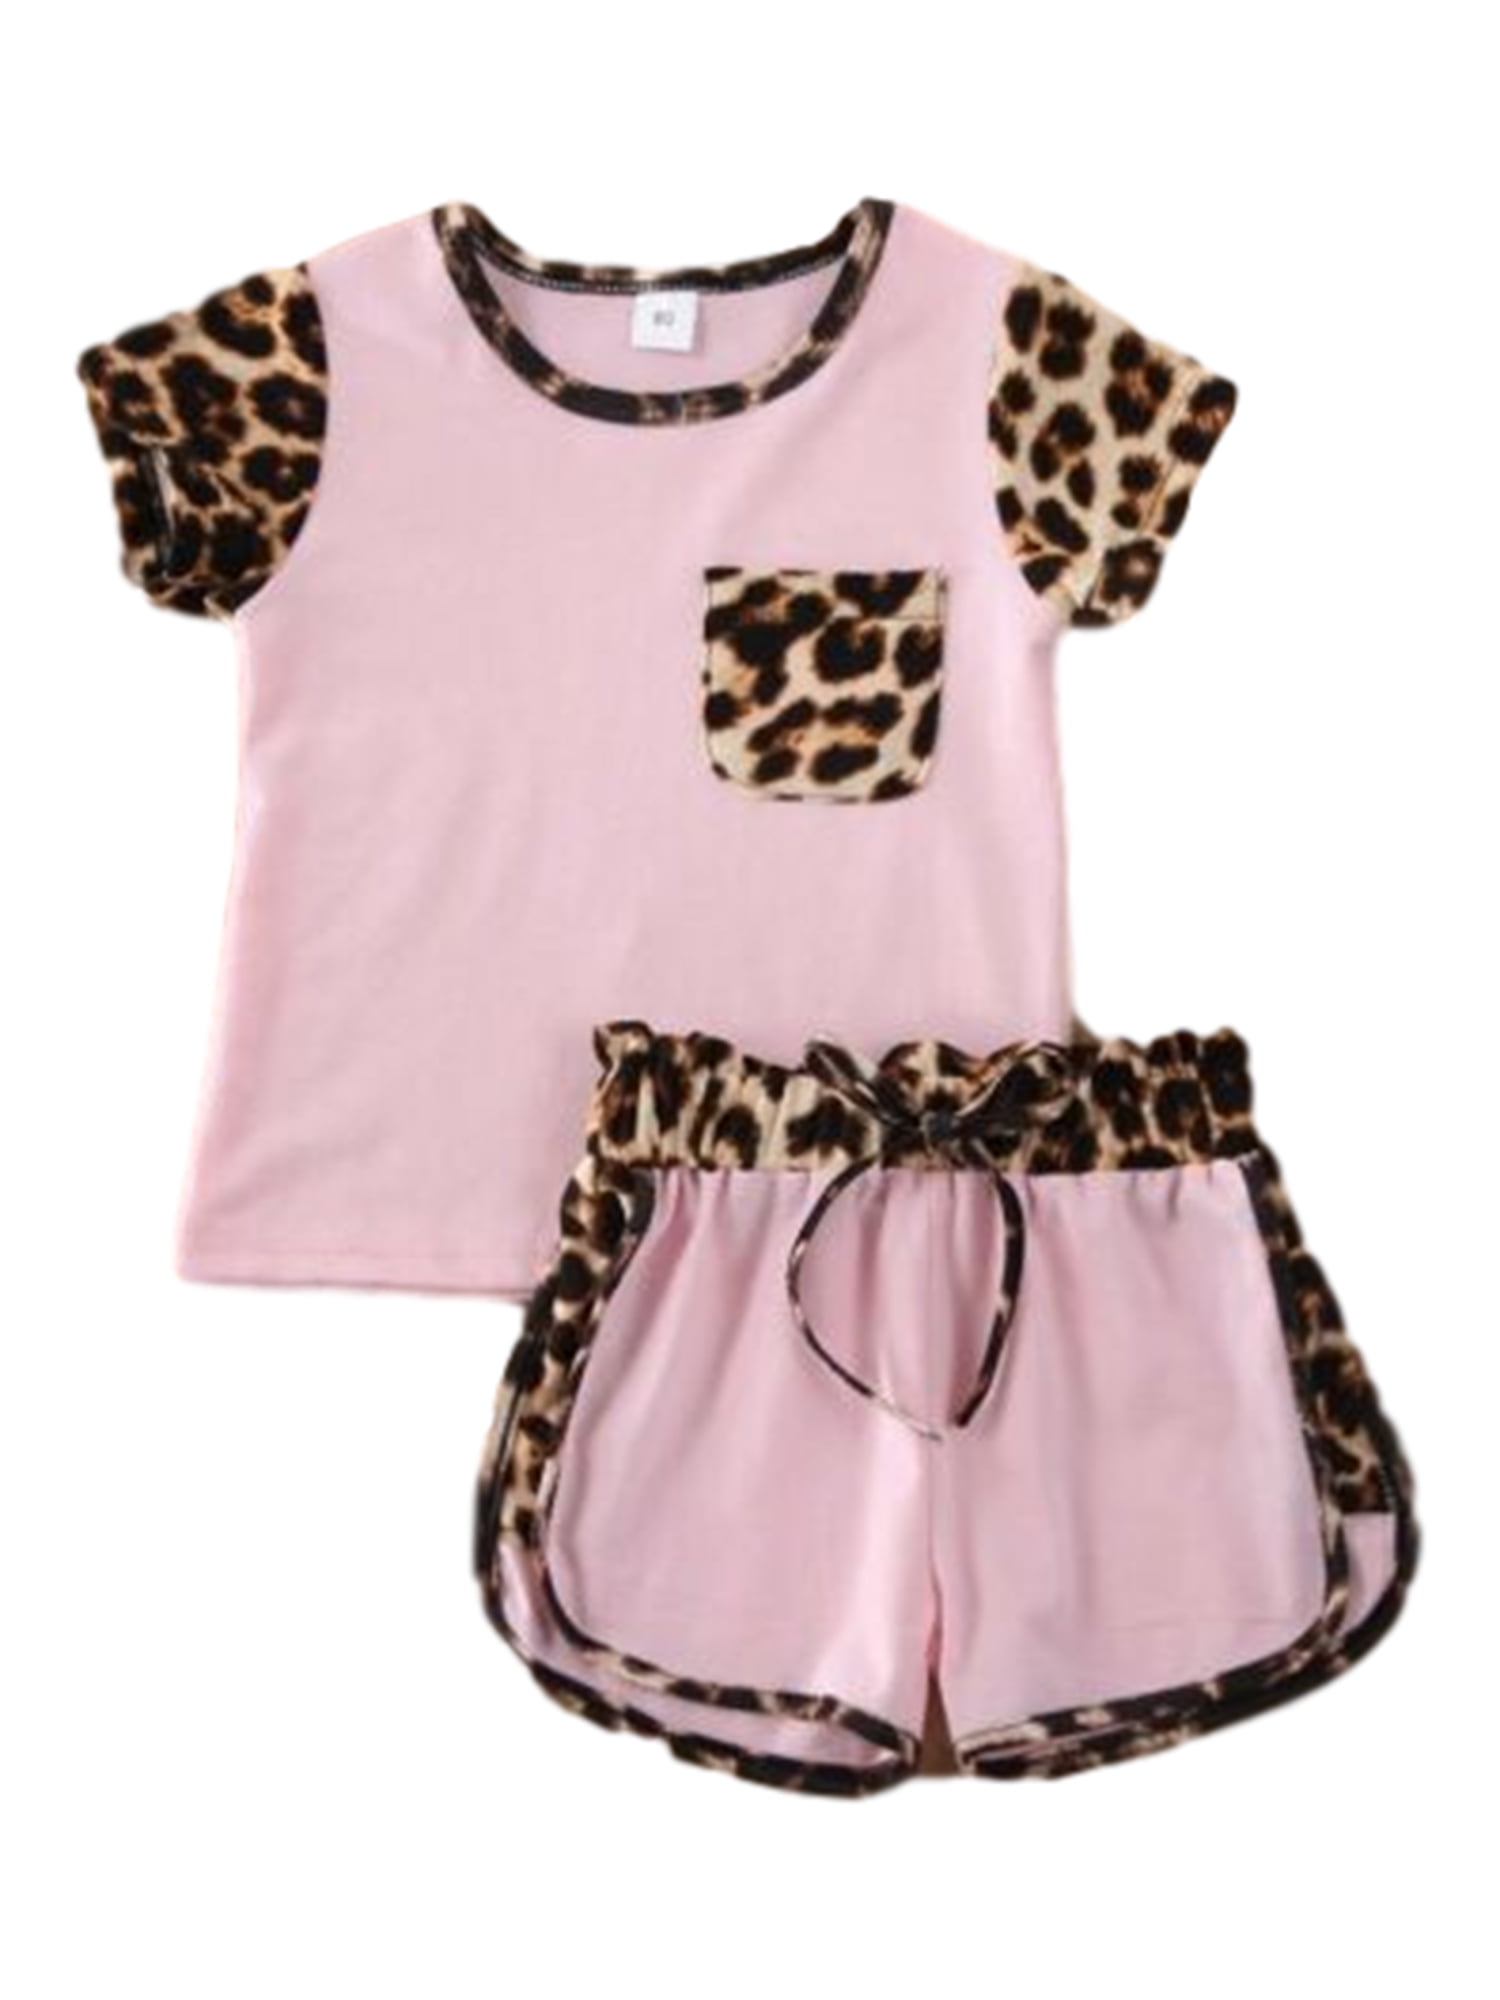 Hot Pink Leopard Bright Girls Summer Shorts Outfit 12-18 Months